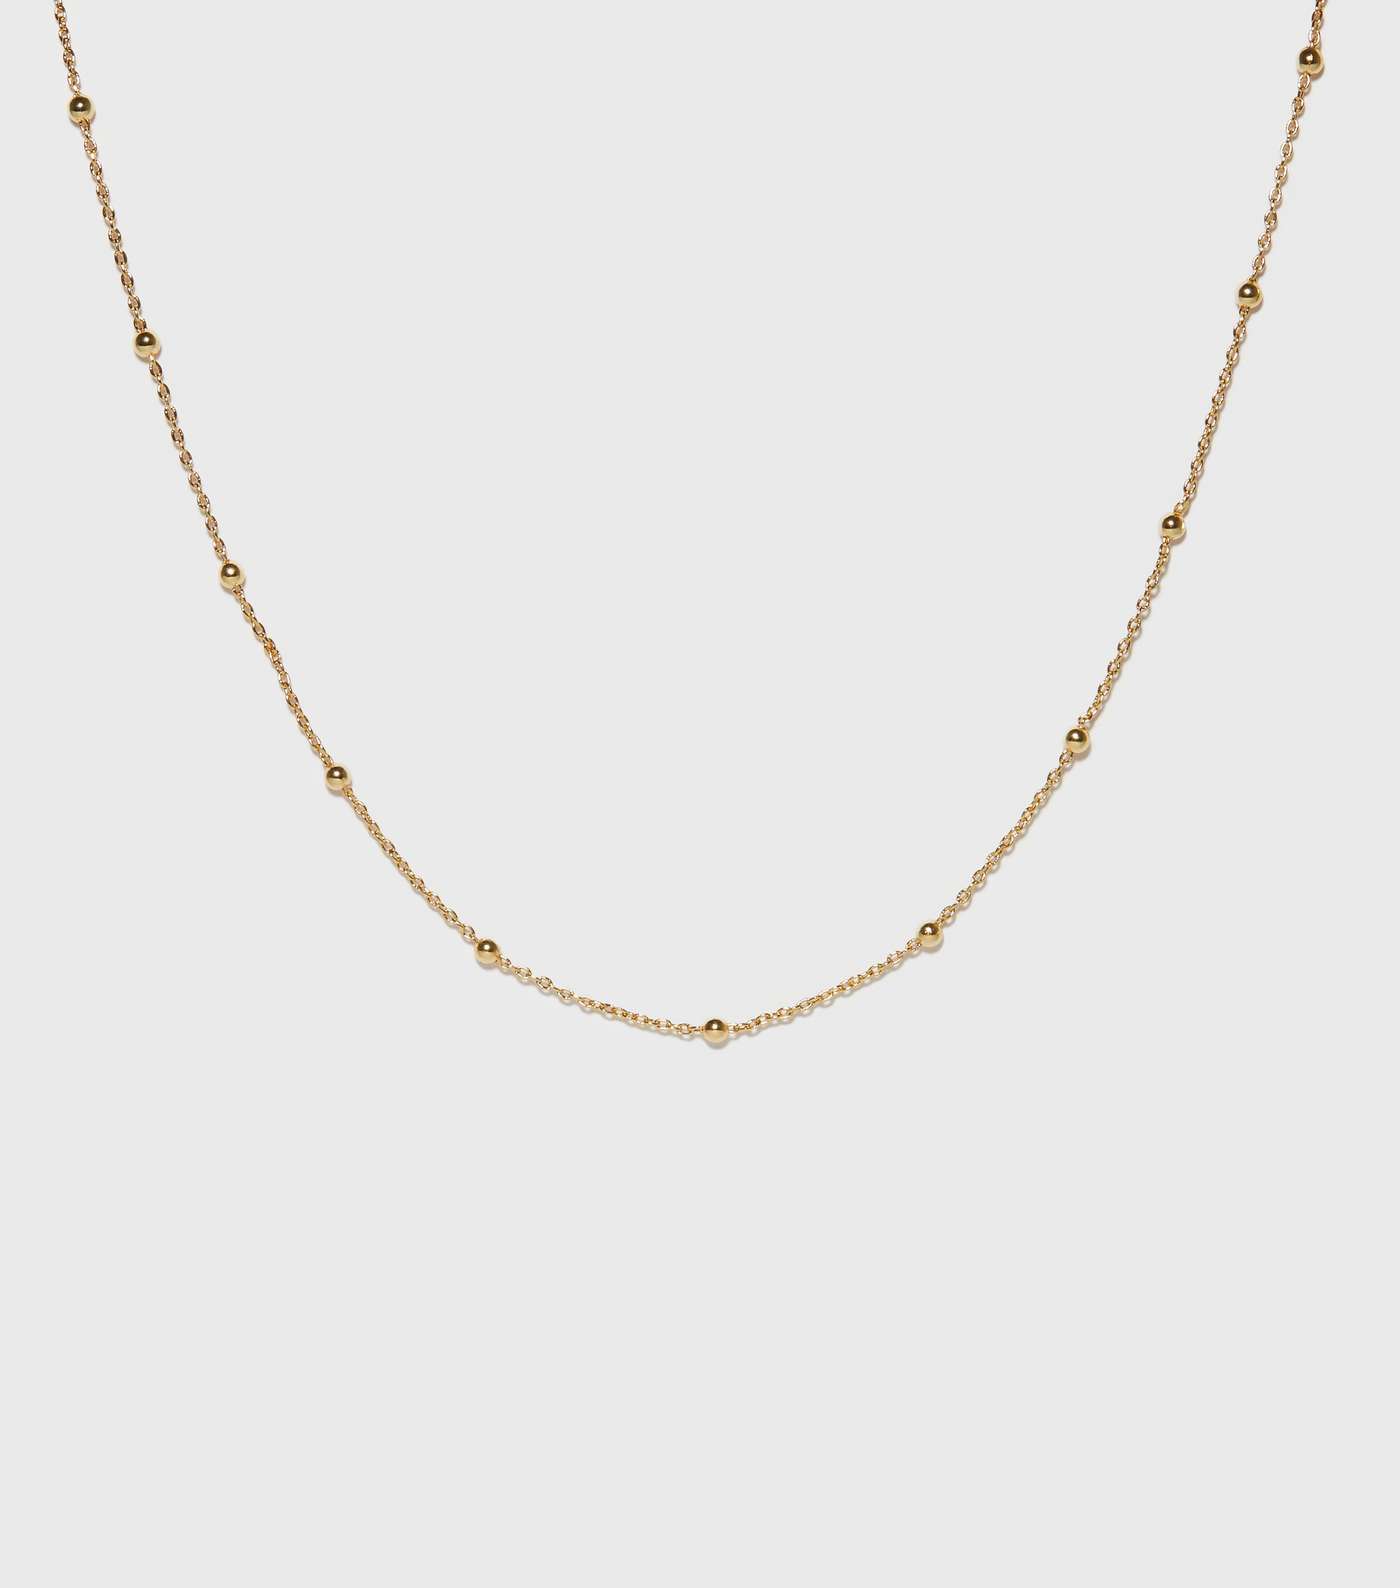 Real Gold Plate Beaded Ball Chain Necklace